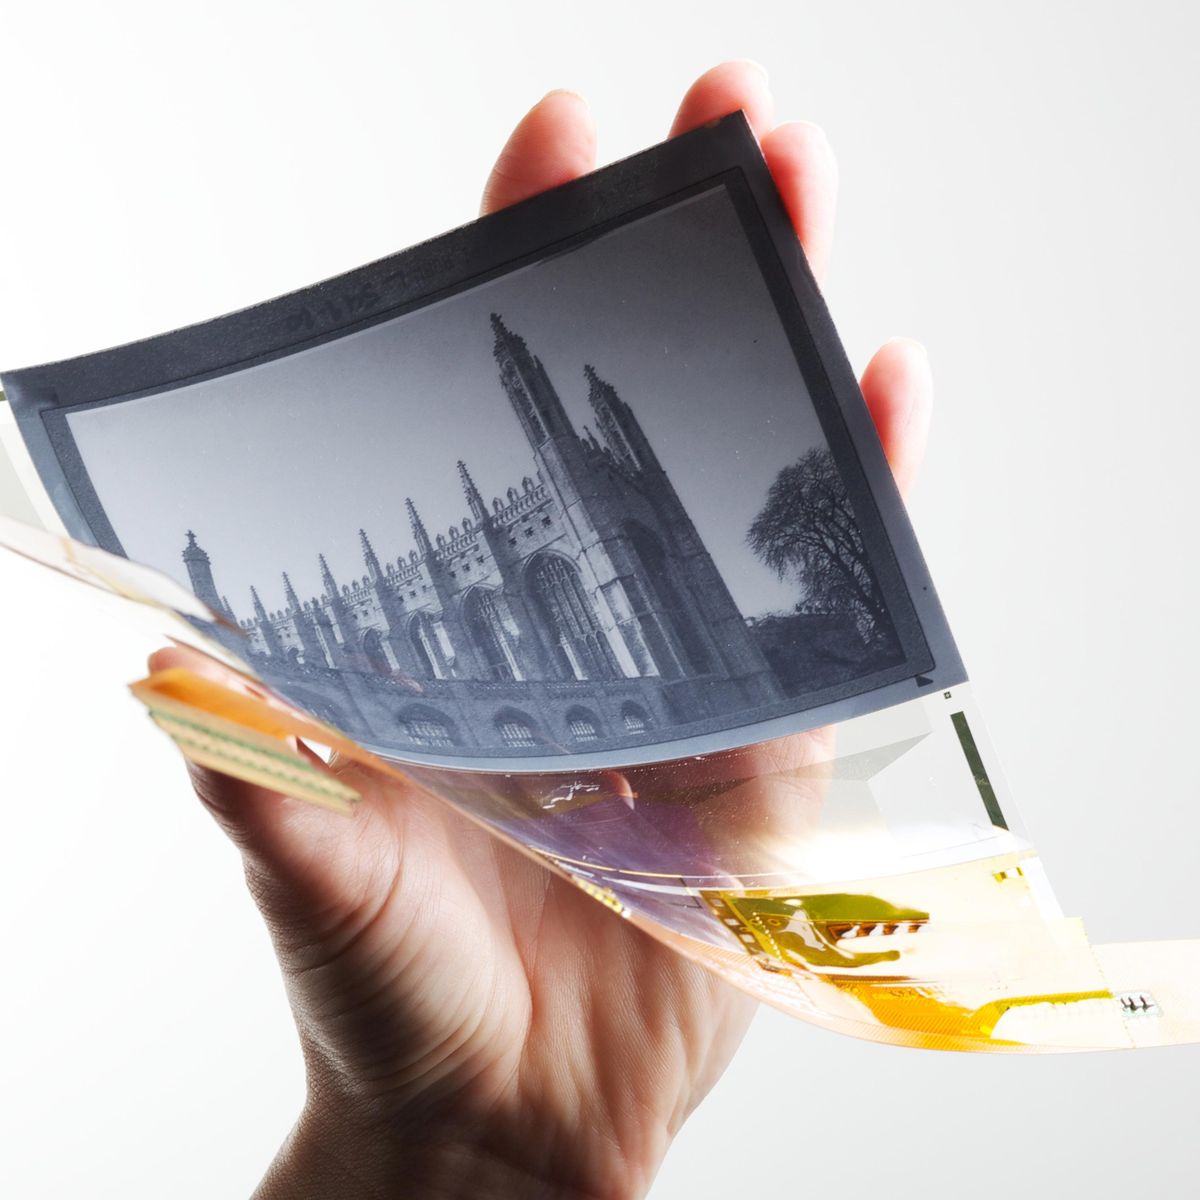 PaperTab: Revolutionary paper tablet reveals future tablets to be thin and  flexible as paper. 